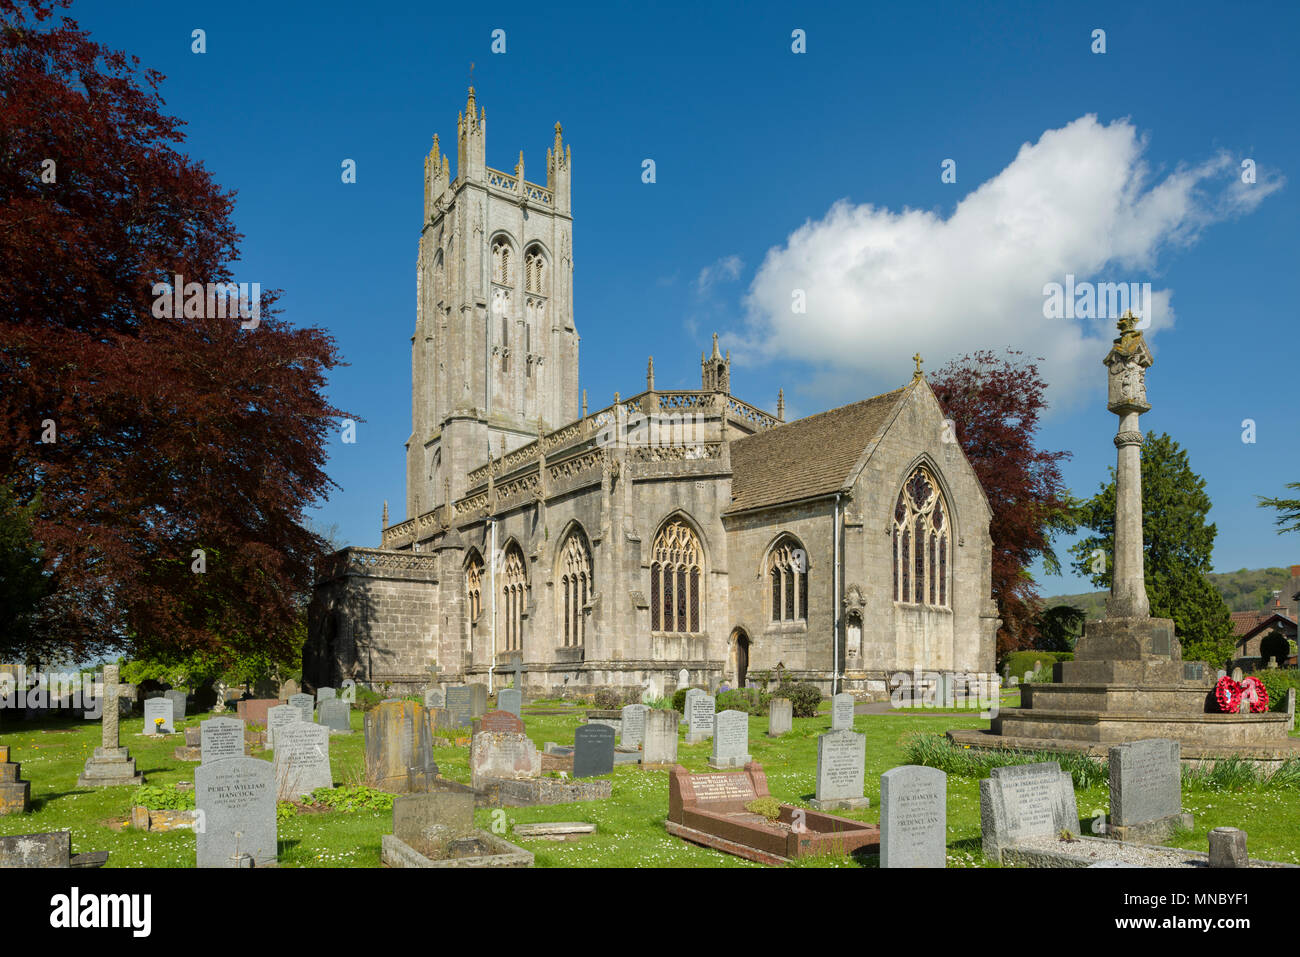 Wrington All Saints Church in North Somerset, Angleterre. Banque D'Images